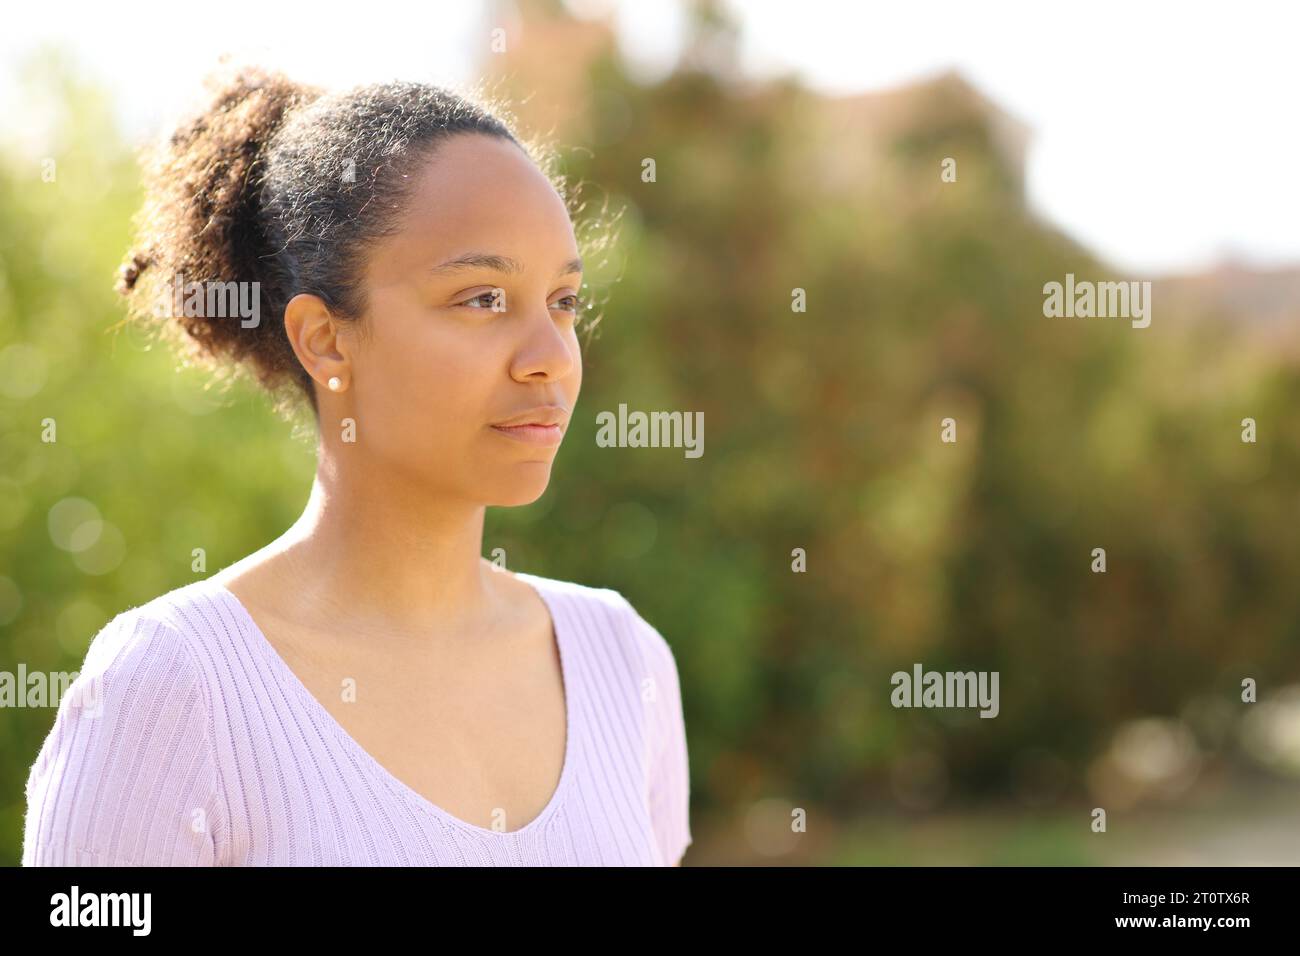 Portrait of a serious black woman in a park looking away Stock Photo